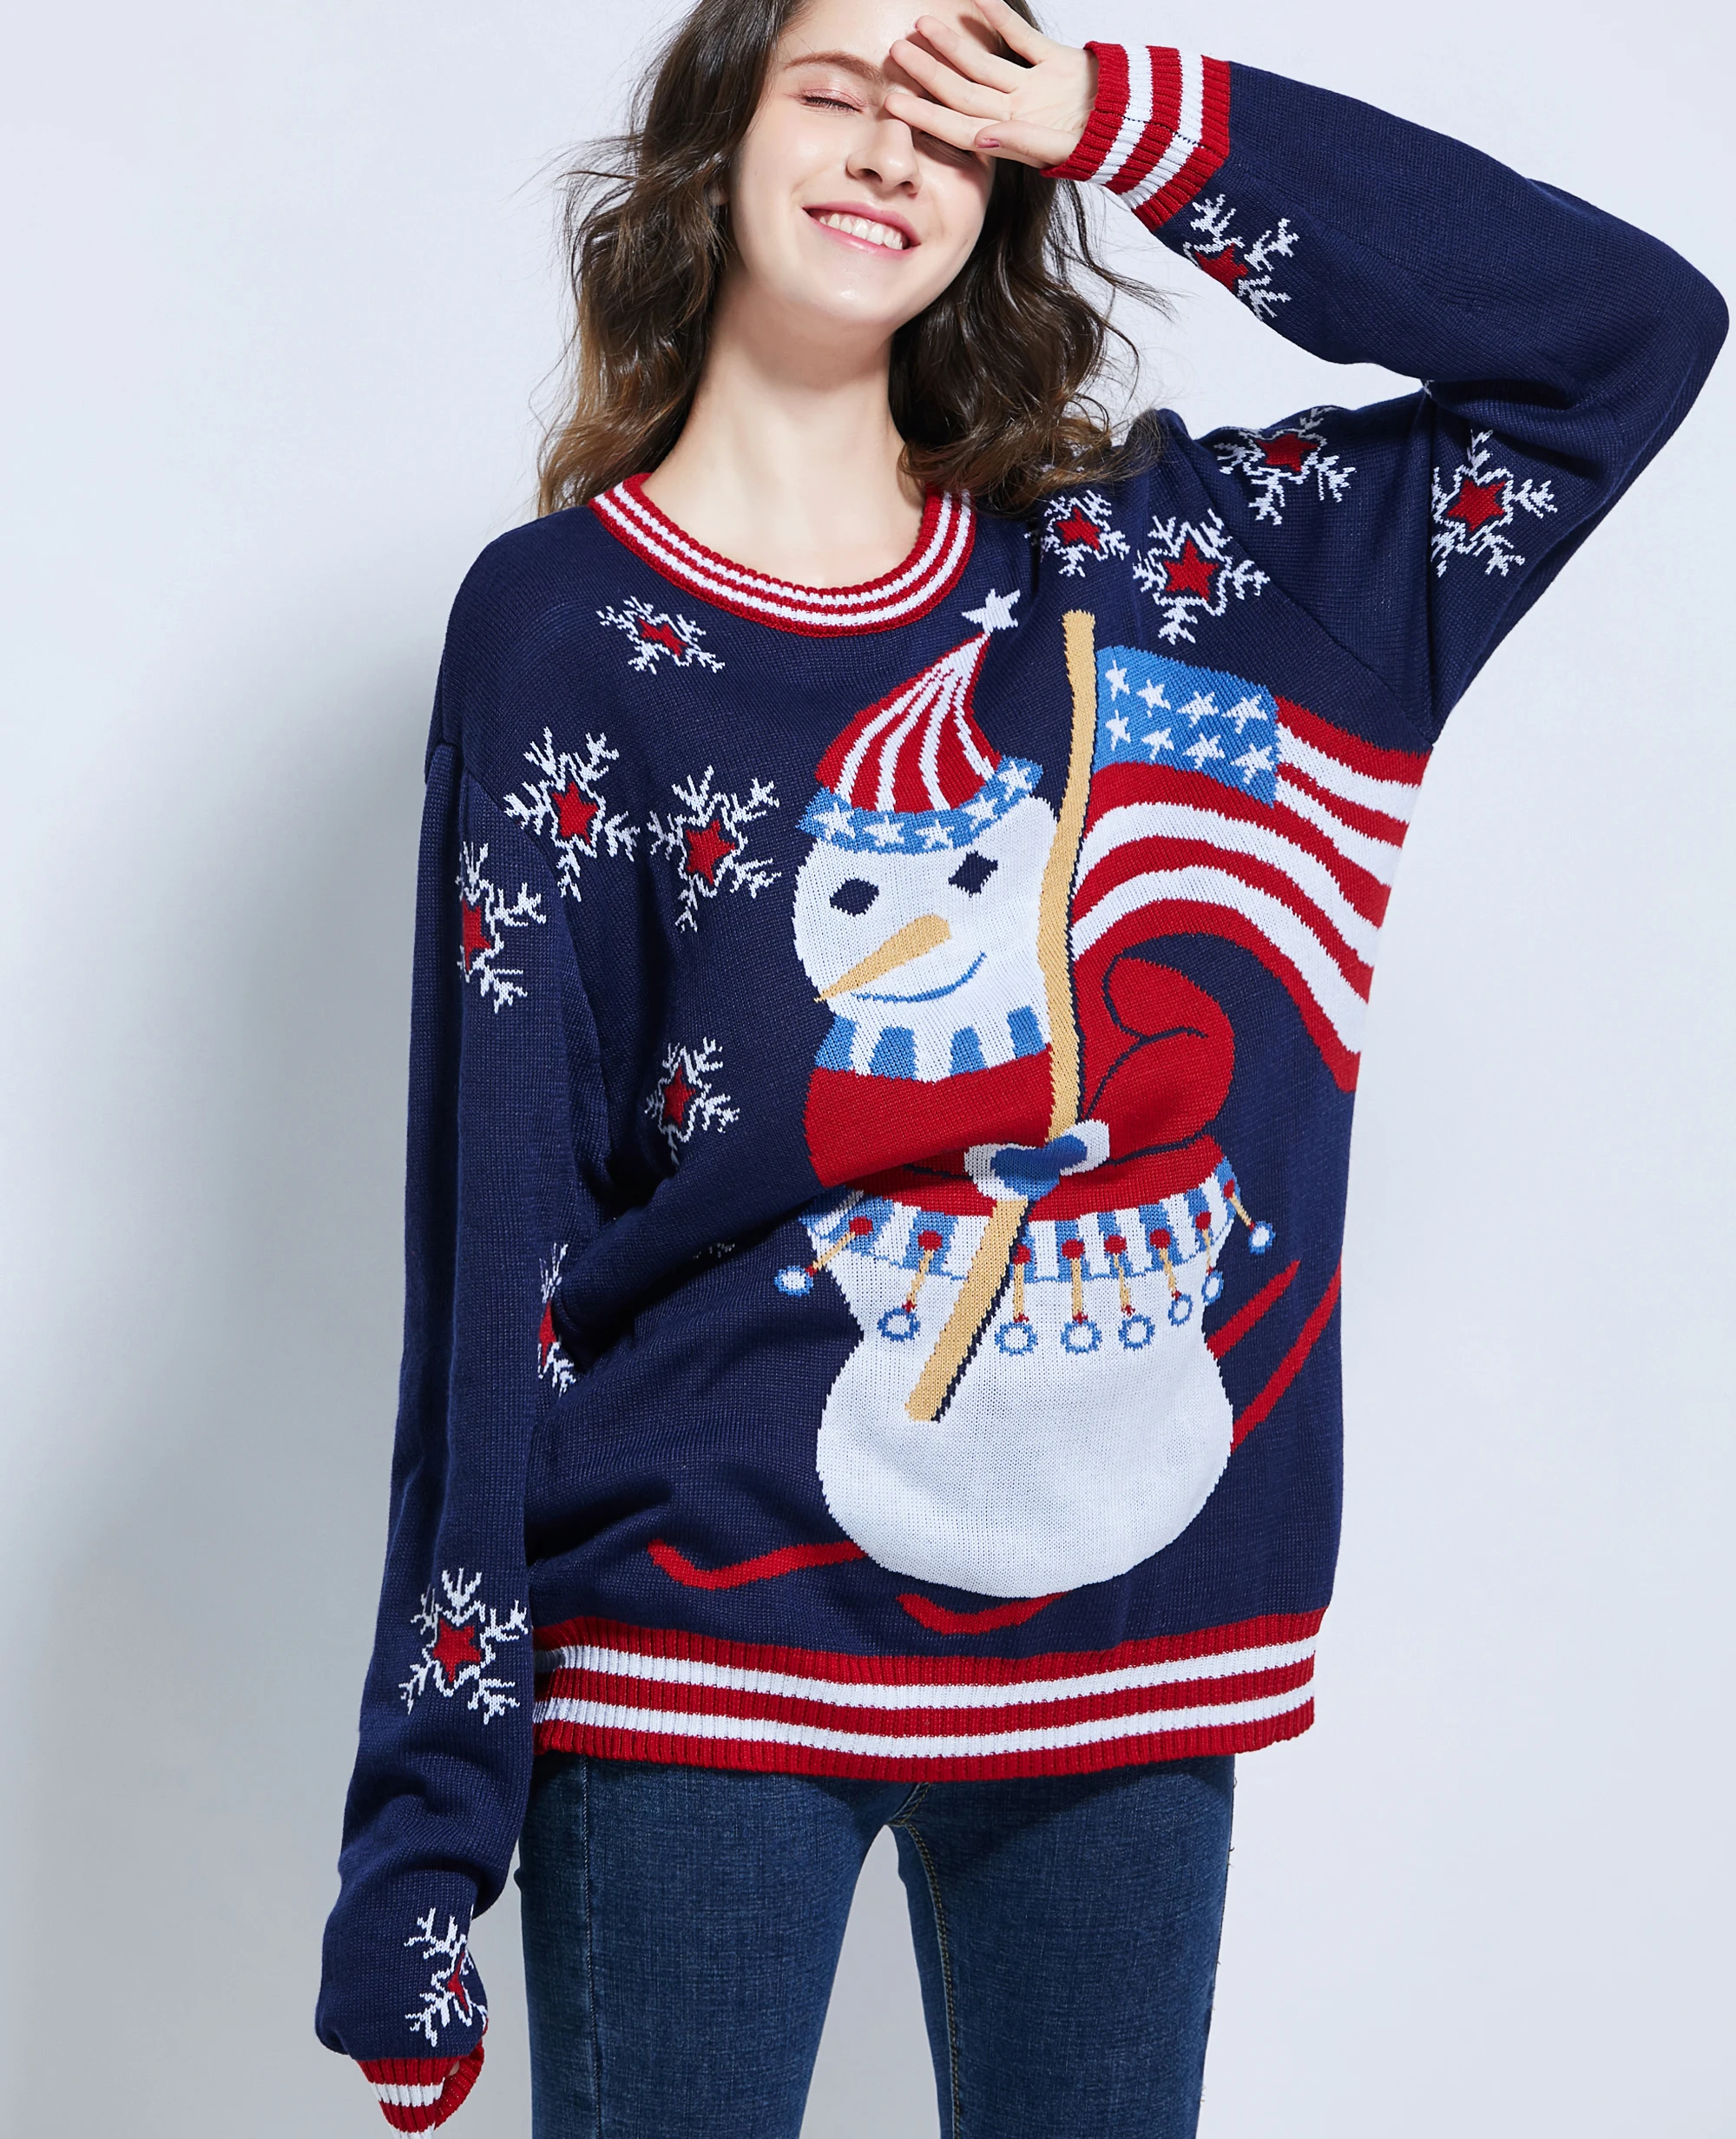  UNICOMIDEA Kids Ugly Christmas Sweaters Boys Girls LED Light Up  Knitted Pullover Xmas Jumper 7-14T : Clothing, Shoes & Jewelry